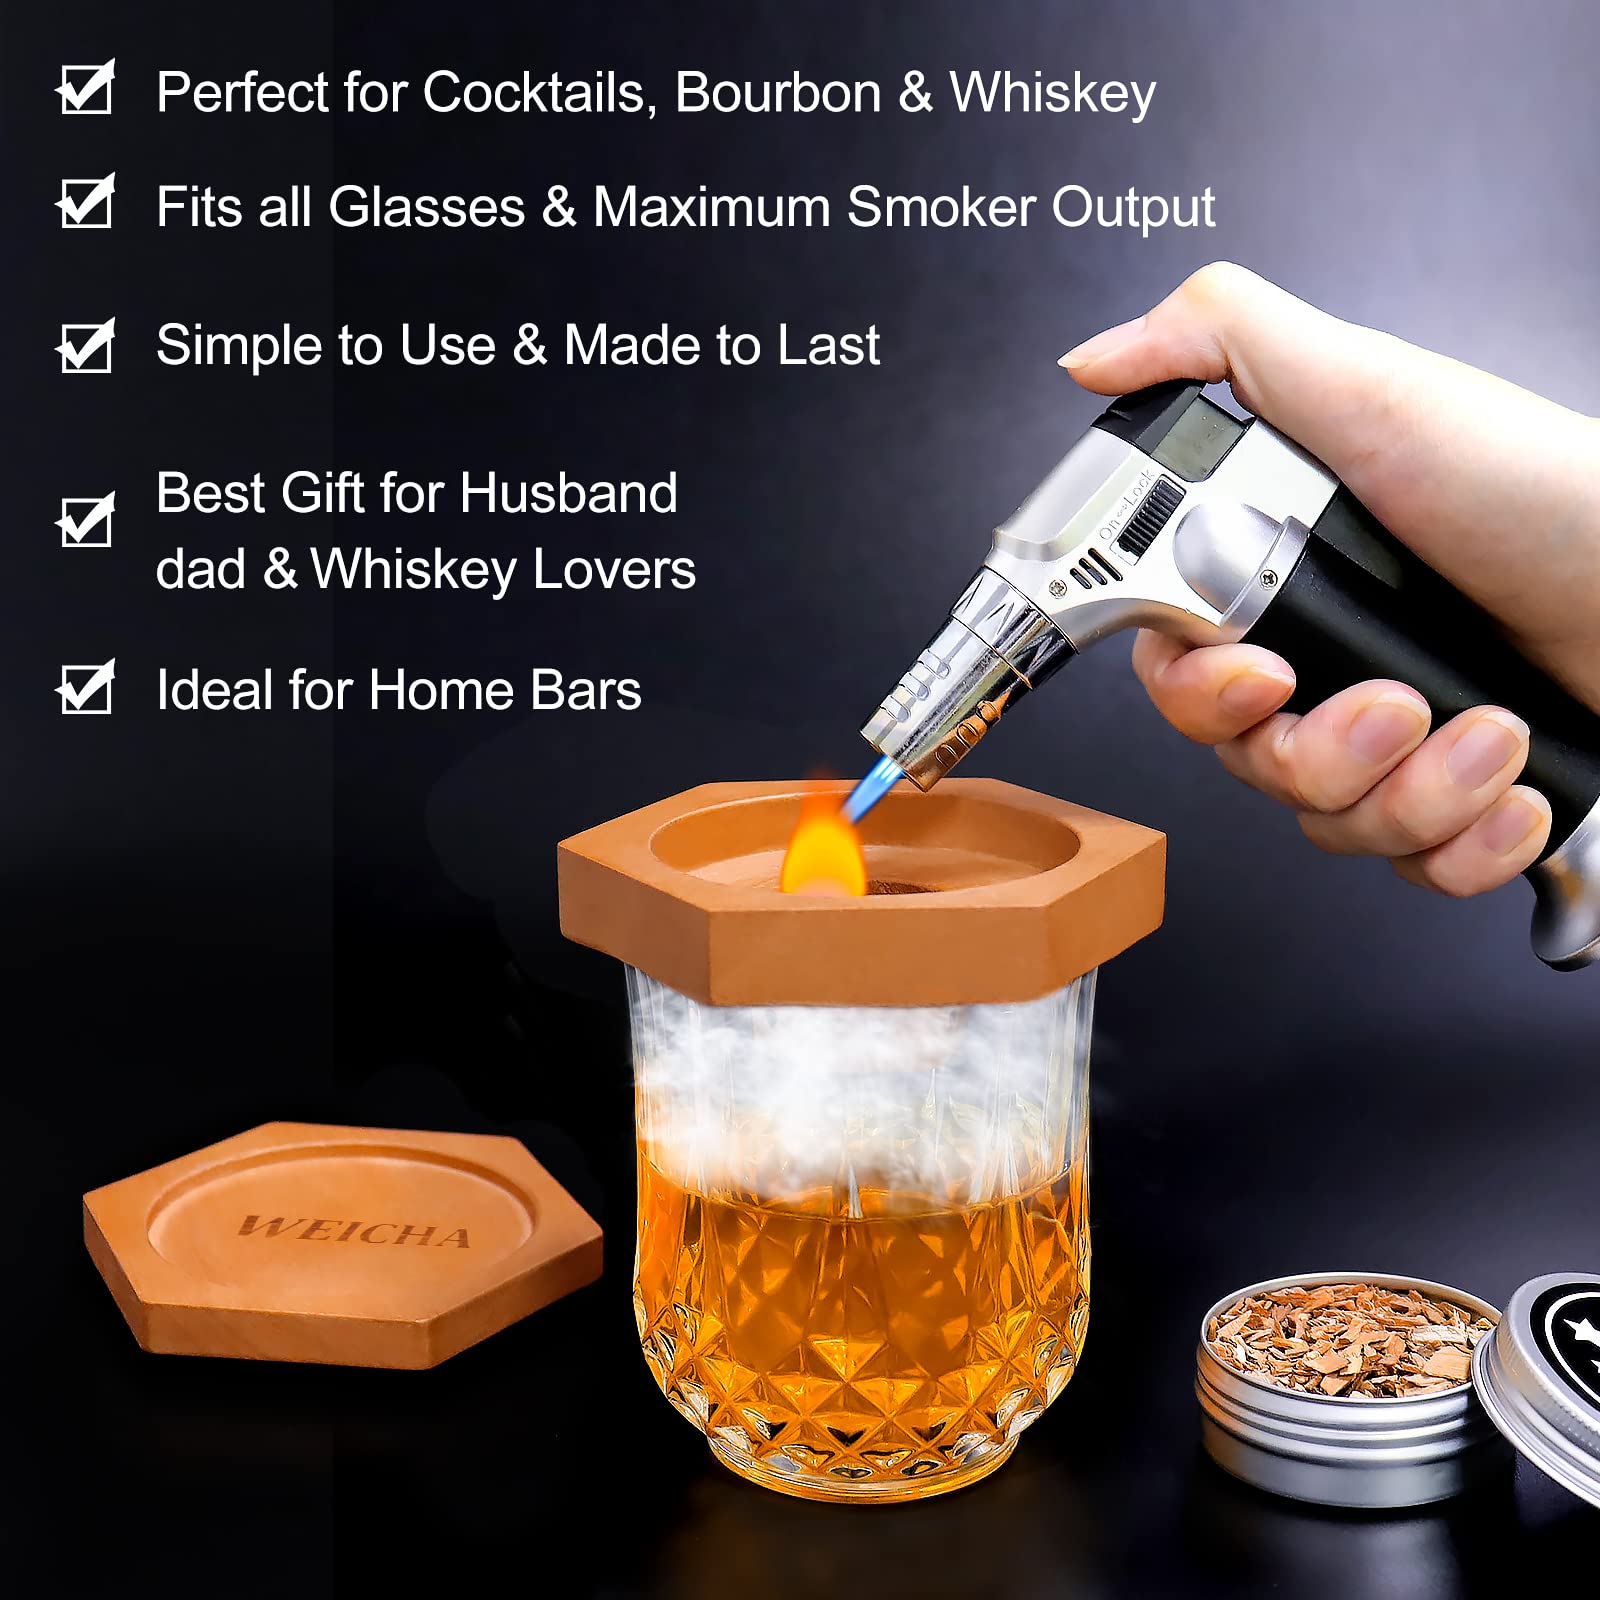 Old-Fashioned Bourbon Whiskey Cocktail Smoker-Kit - Aged Wood Drink Smoker Infuser Kit with Torch, Smoked Cocktail Kit with 4 Flavored Smoking Wood Chips, Bar Whiskey Smoker Gifts for Men (No Butane)